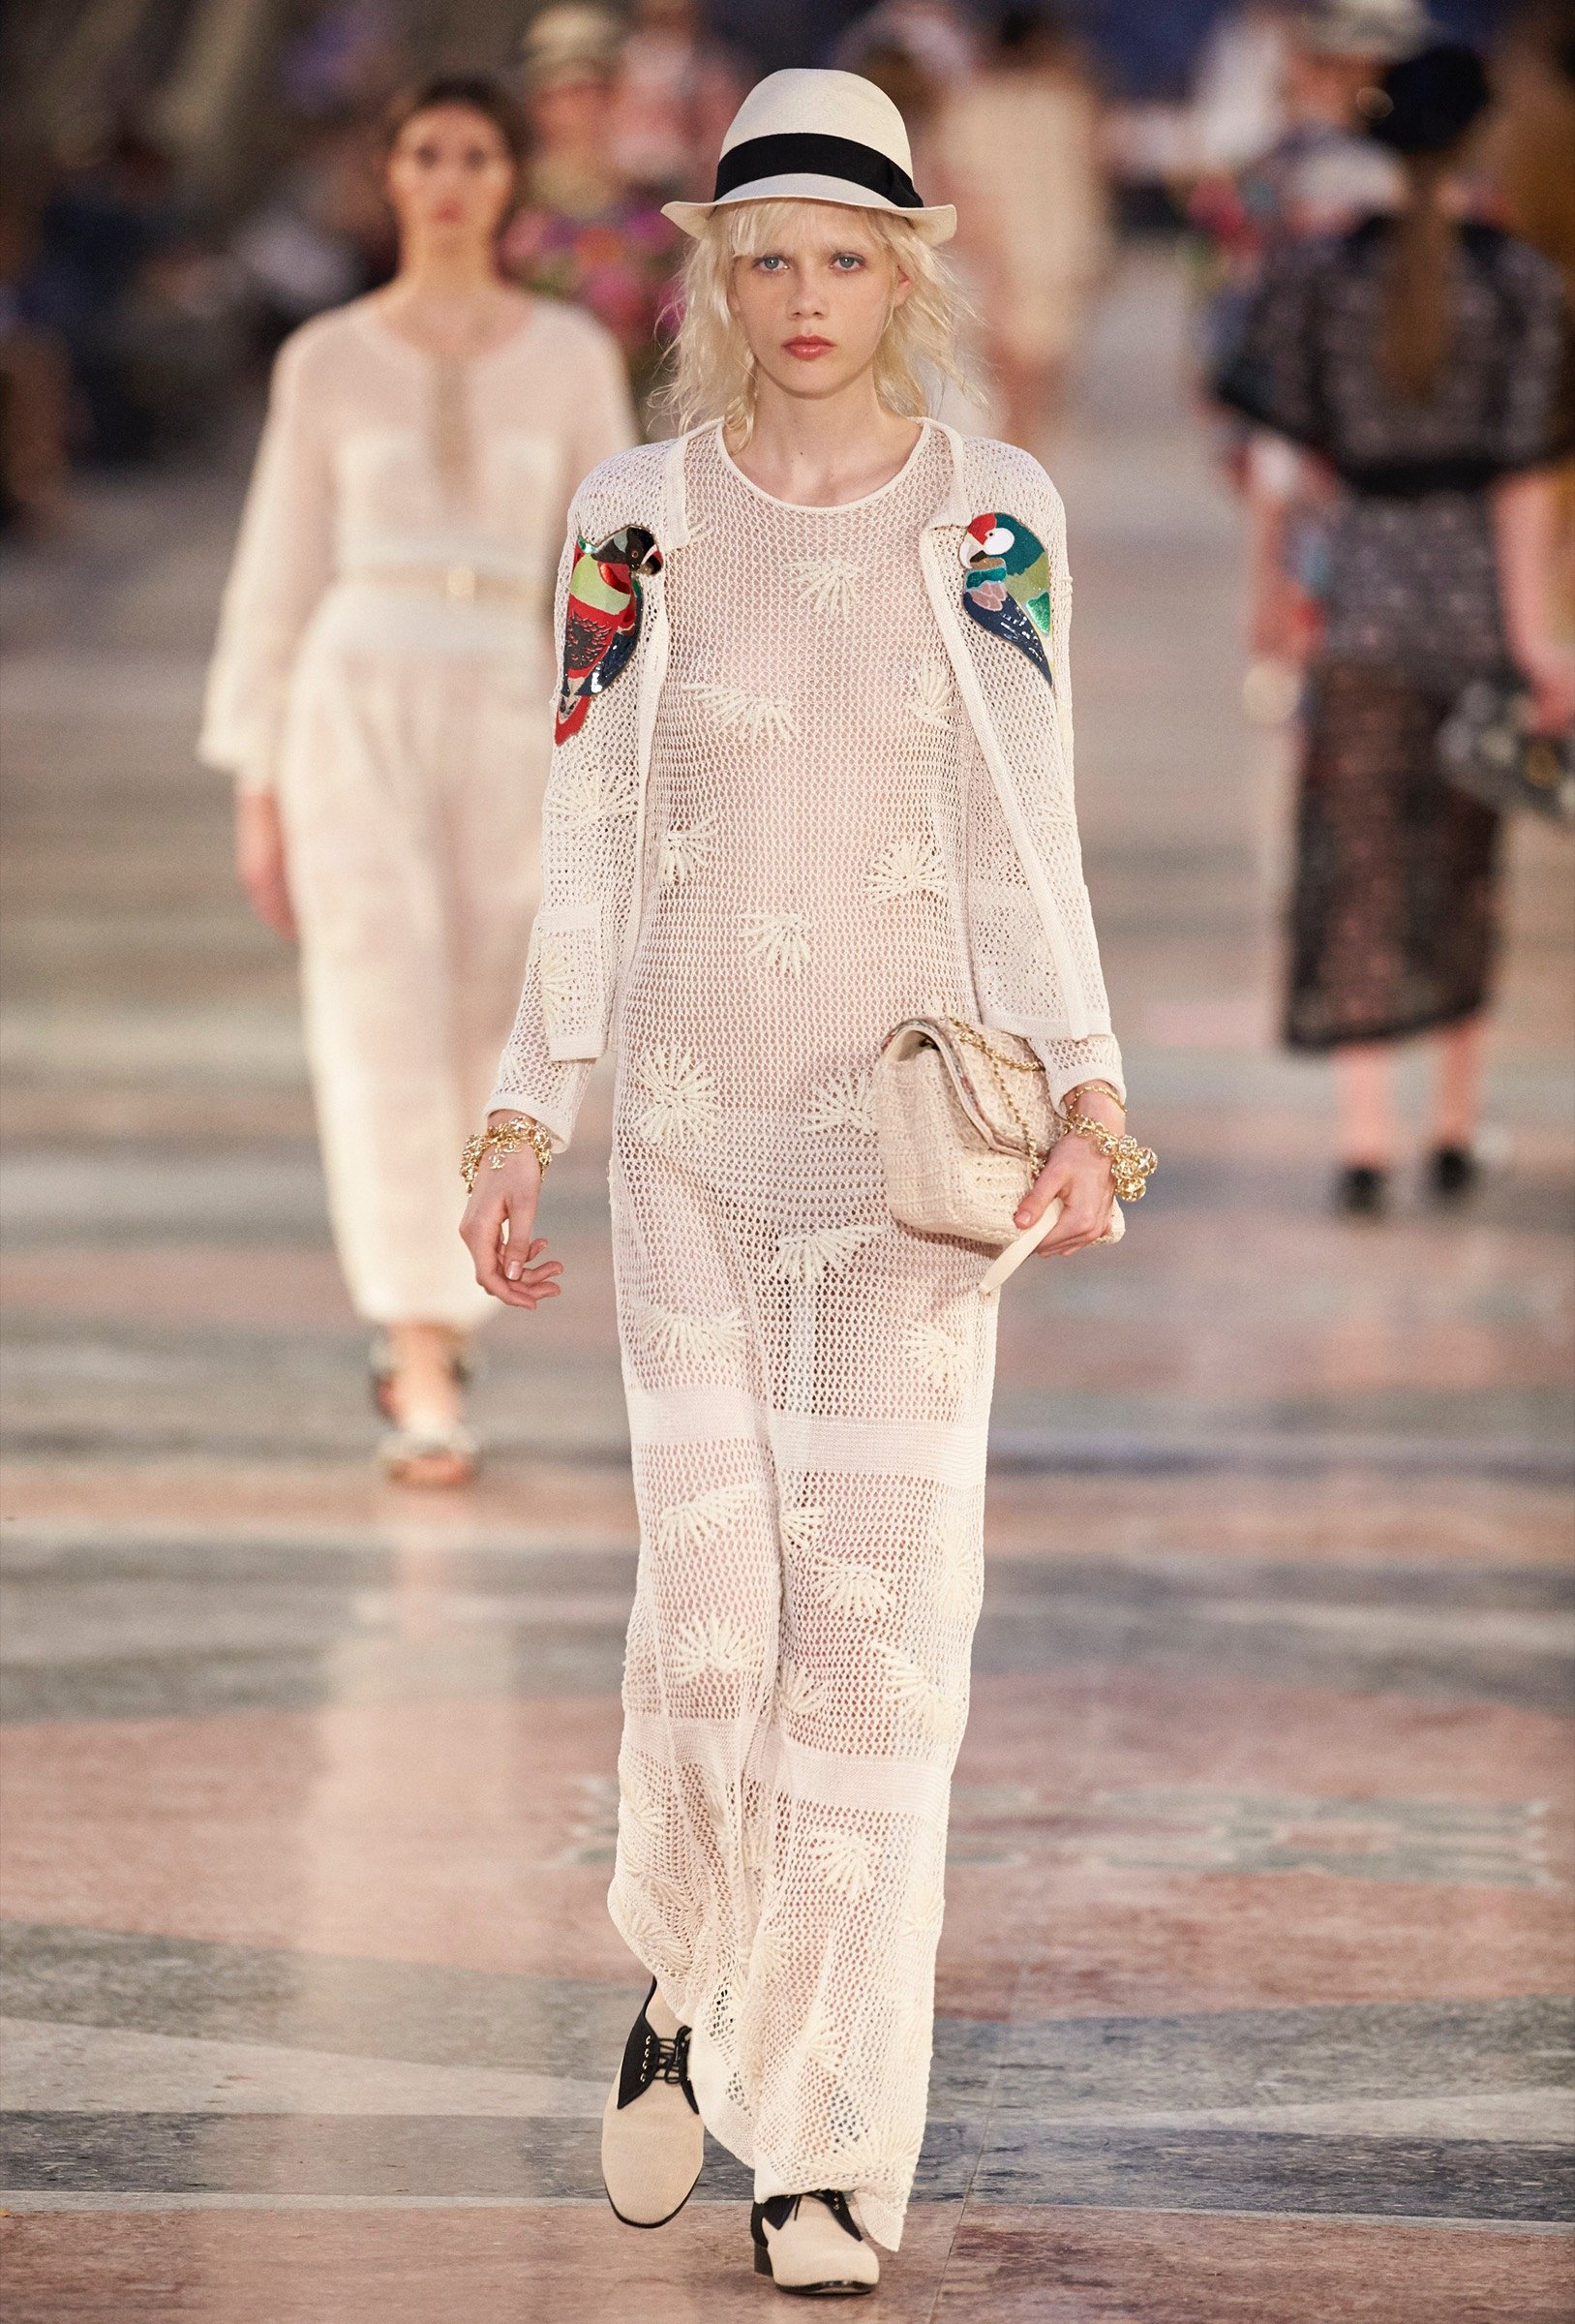 Chanel Cruise 2017 - Ready-to-Wear